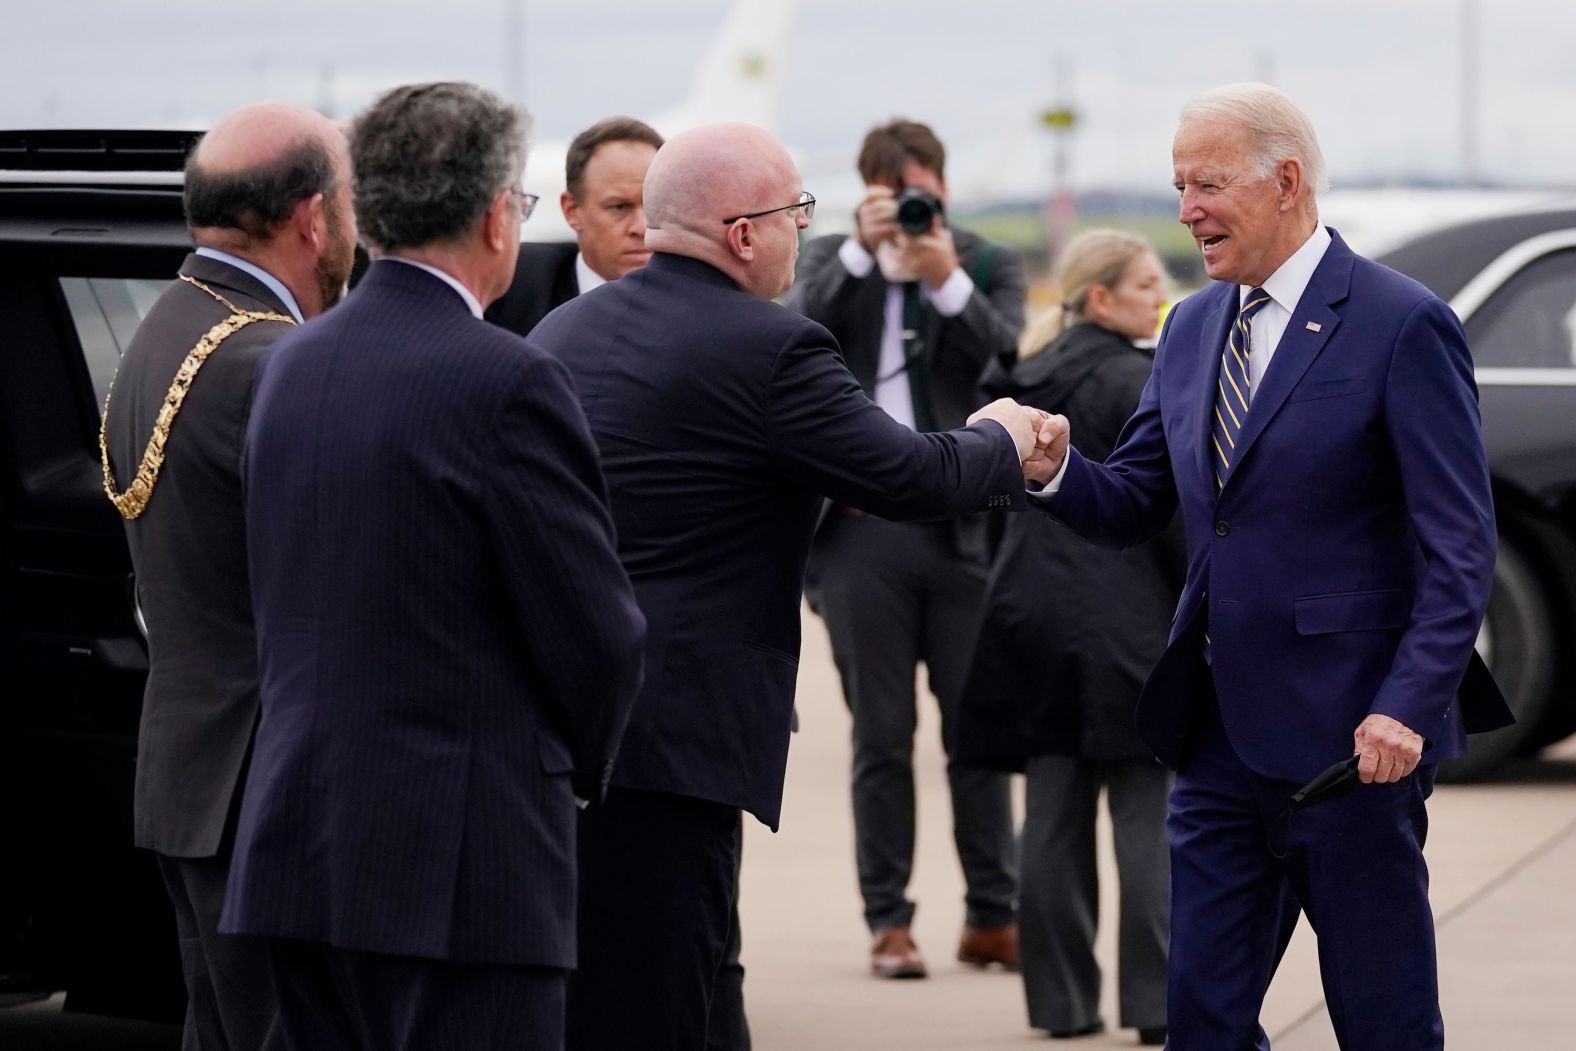 Biden is greeted at Edinburgh Airport before attending COP26. He and his wife, Jill, were in Italy over the weekend as he attended the Group of 20 Summit in Rome.